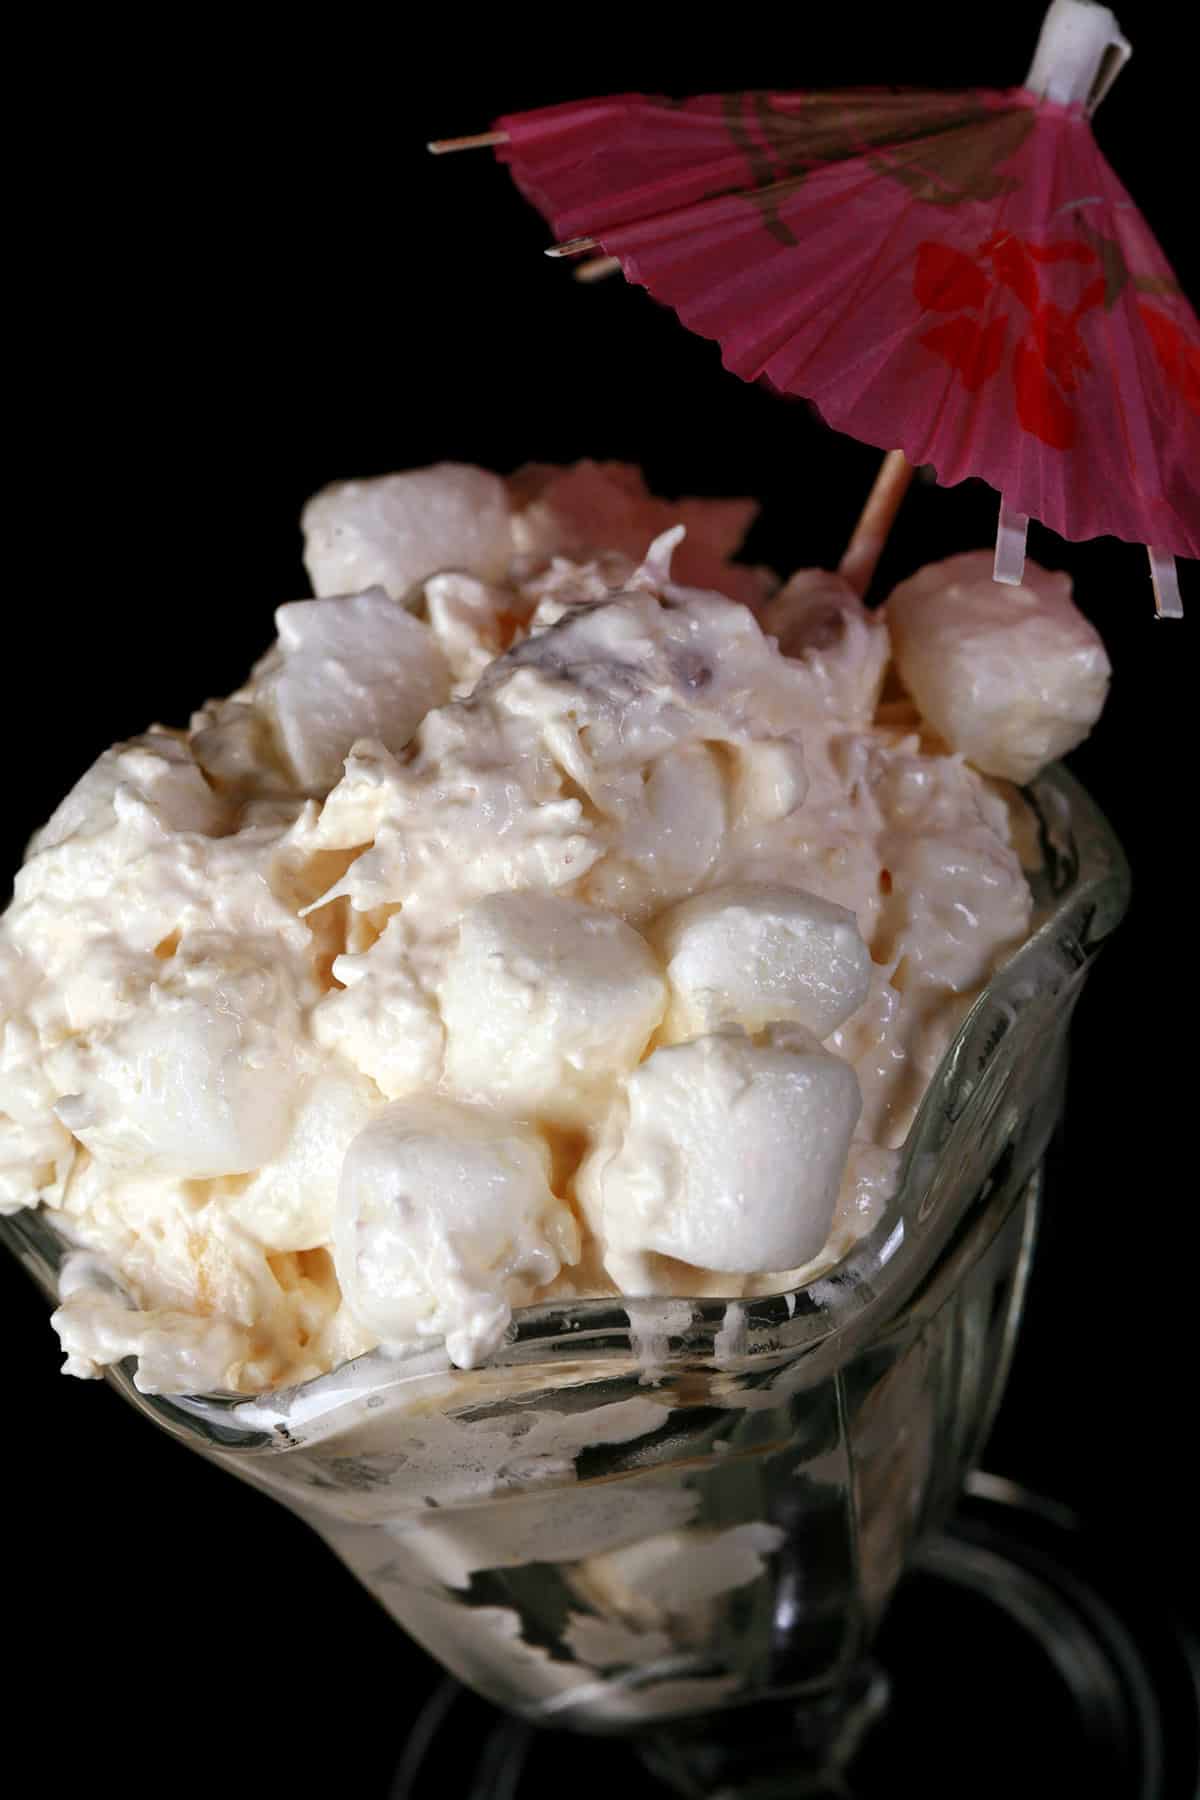 Pina colada marshmallow salad in a tulip glass with a pink cocktail umbrella sticking out.